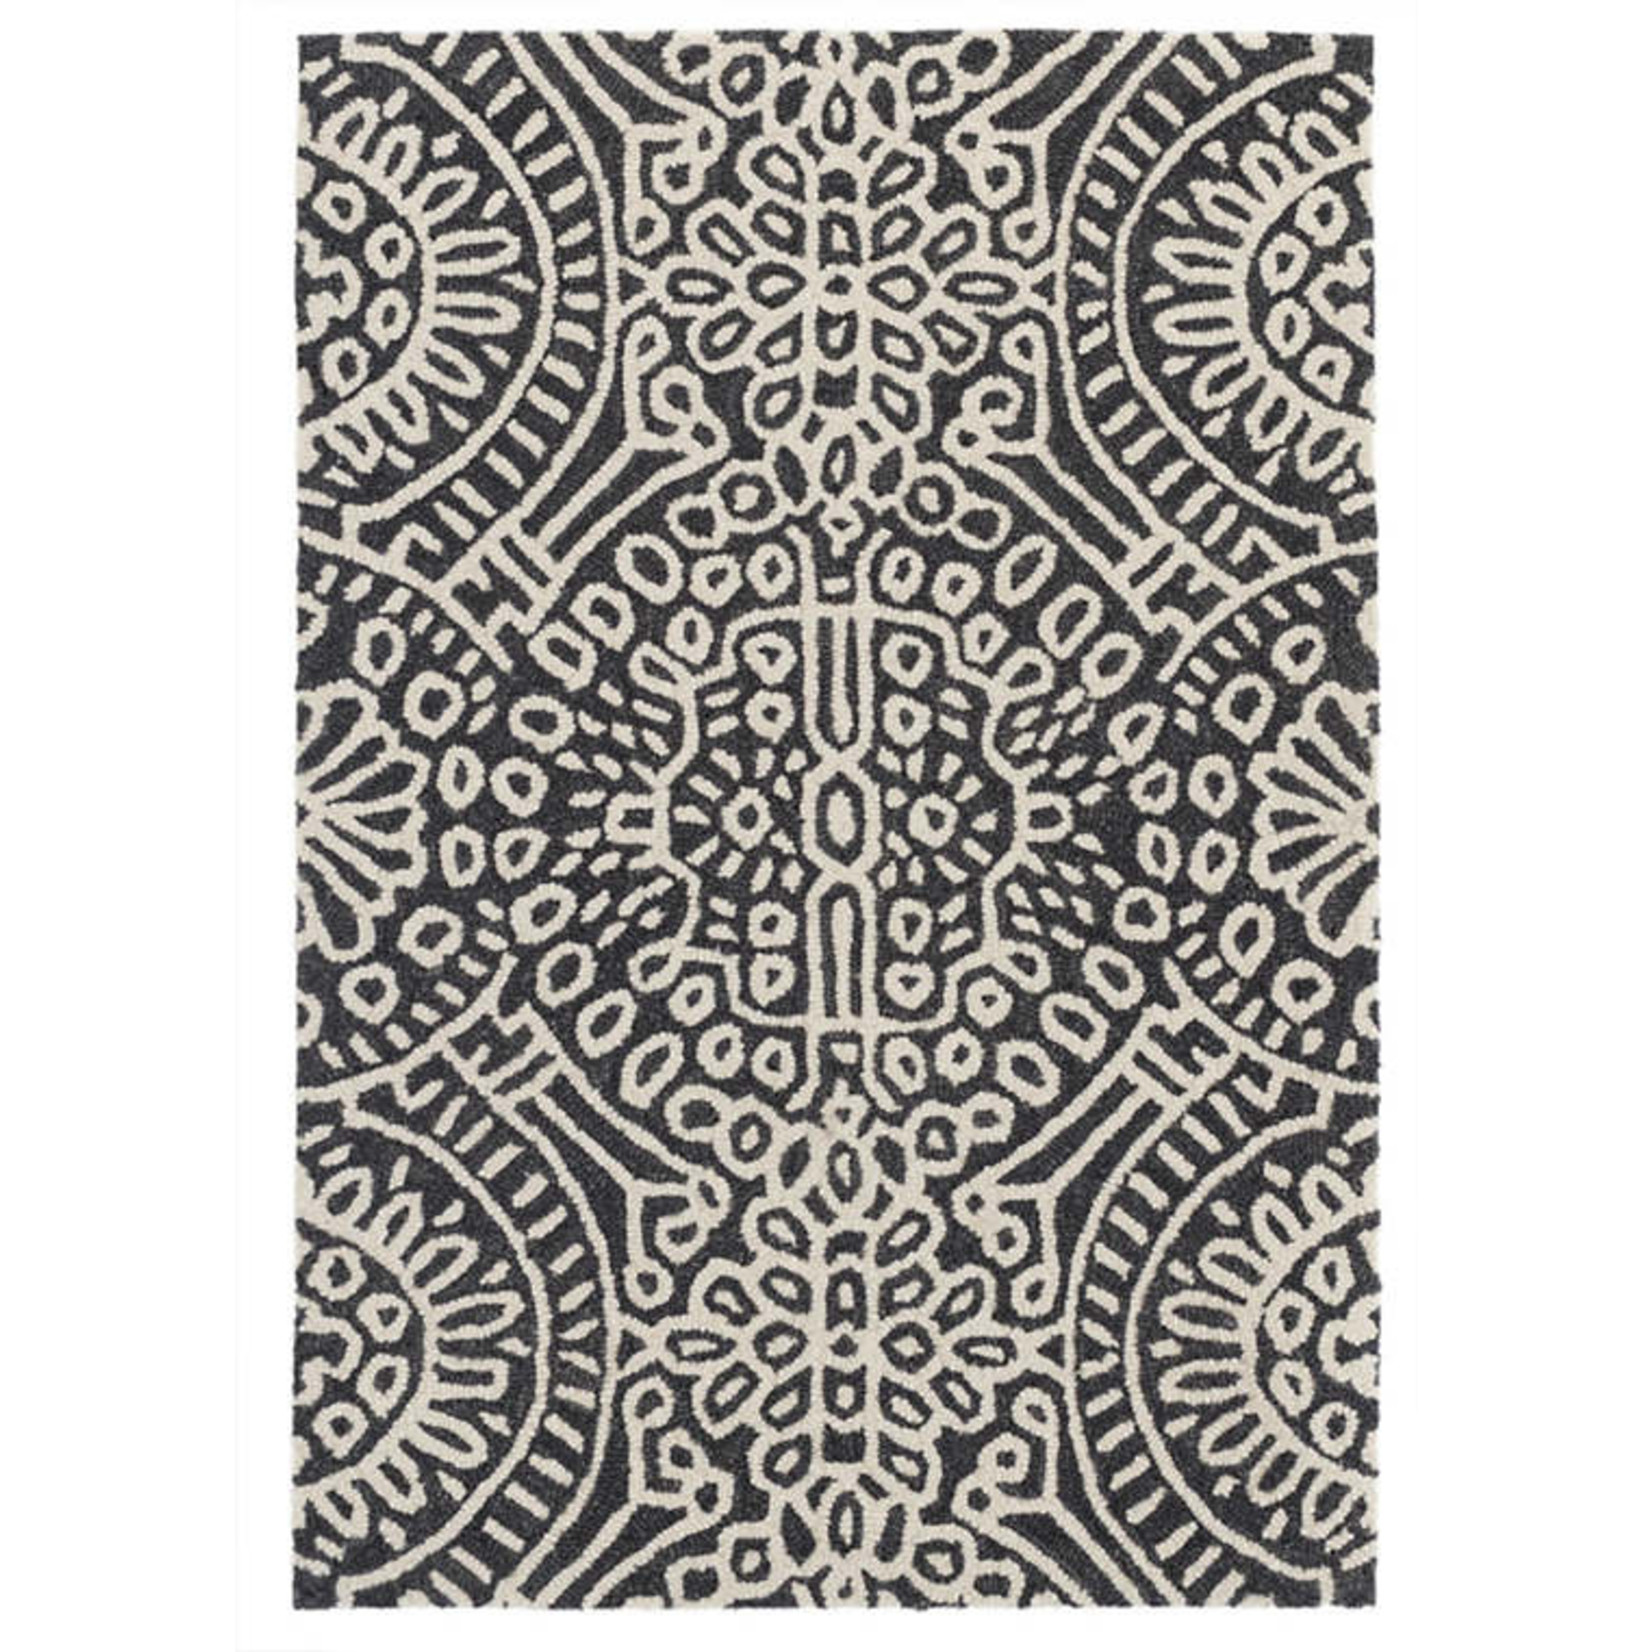 Temple -  Charcoal Micro Hooked Rug